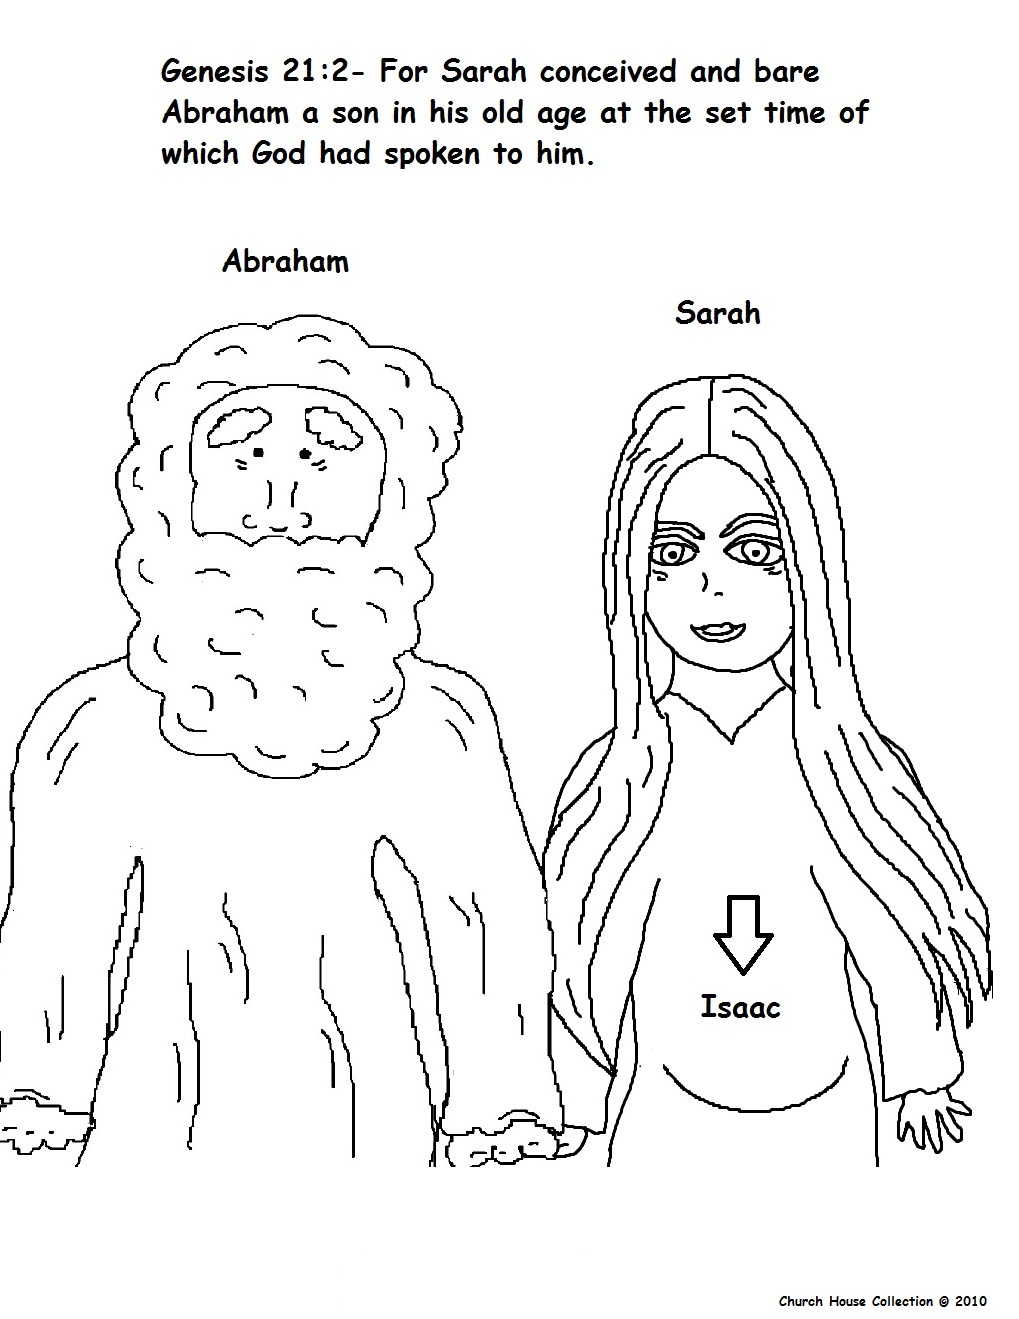 abraham and lot coloring pages